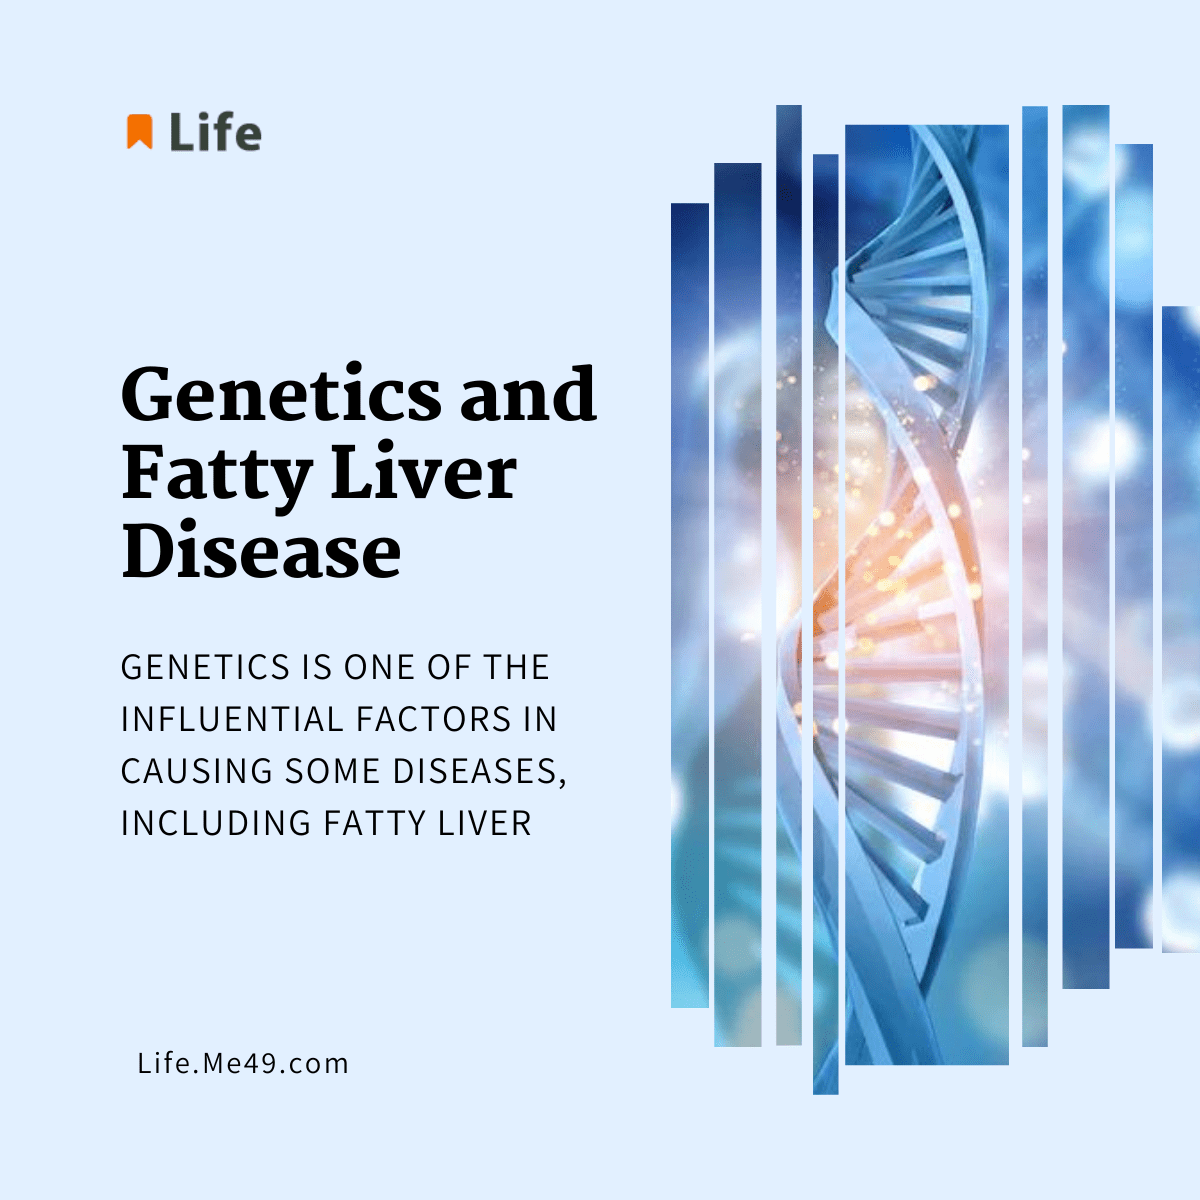 Genetics and Fatty Liver Disease